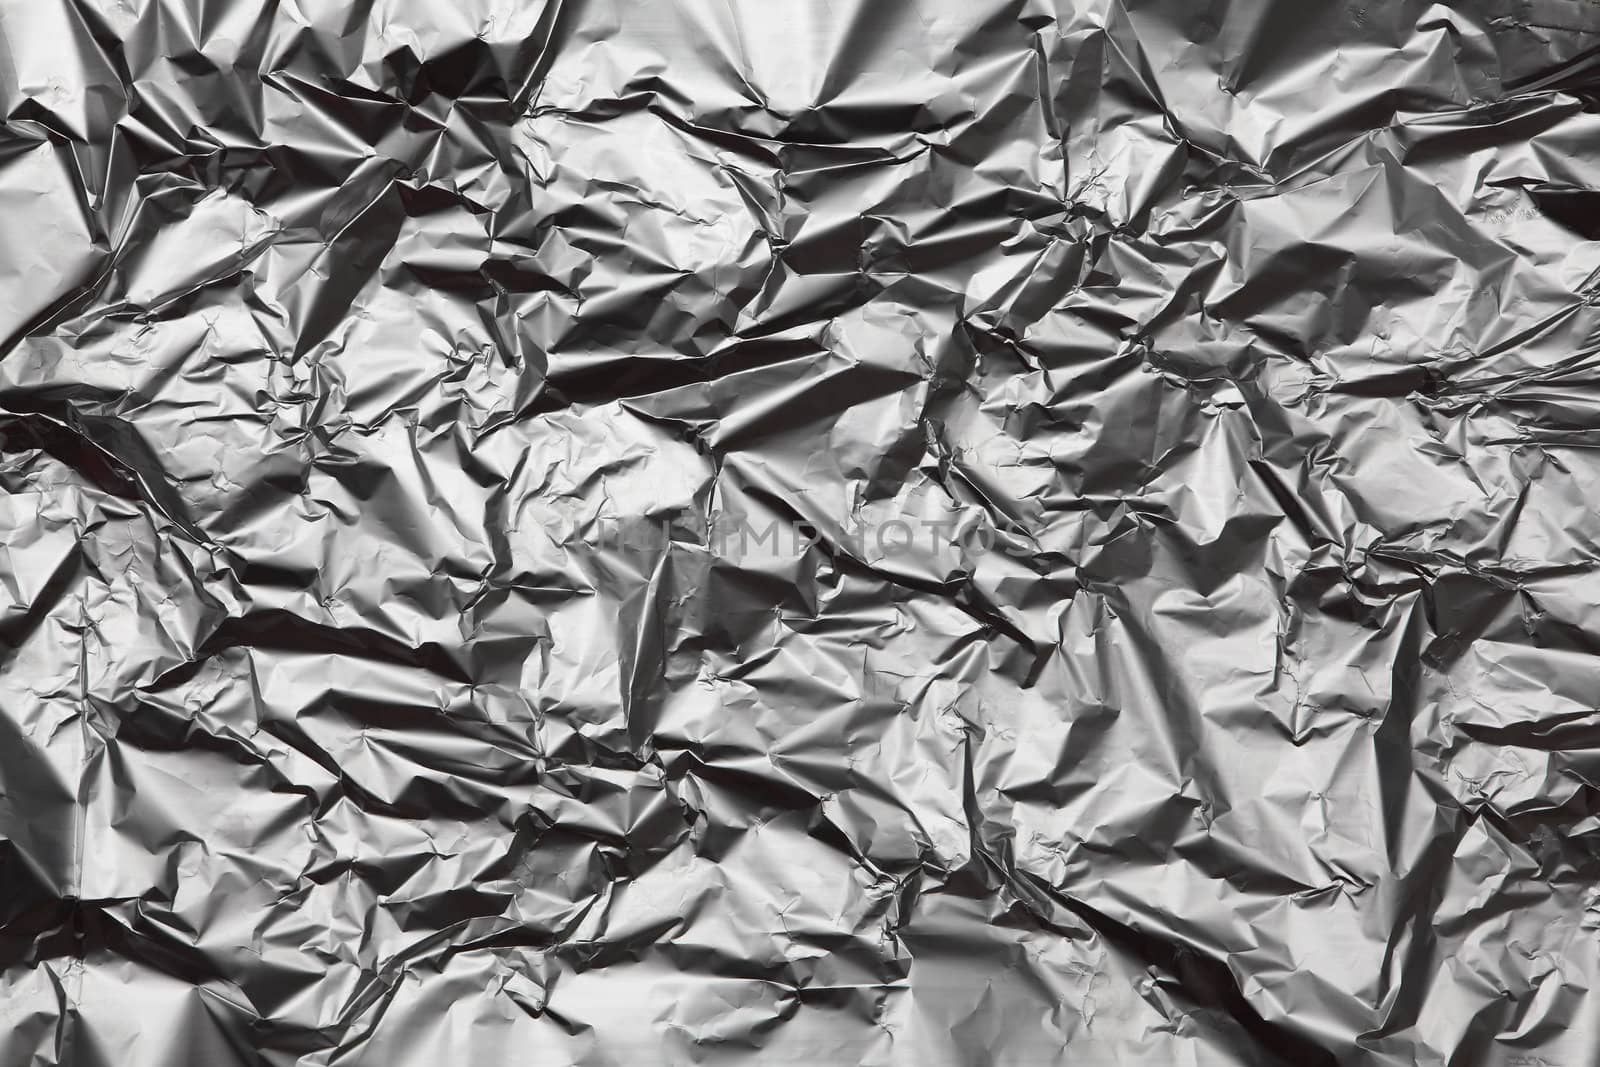 Foil wrap background by sumners